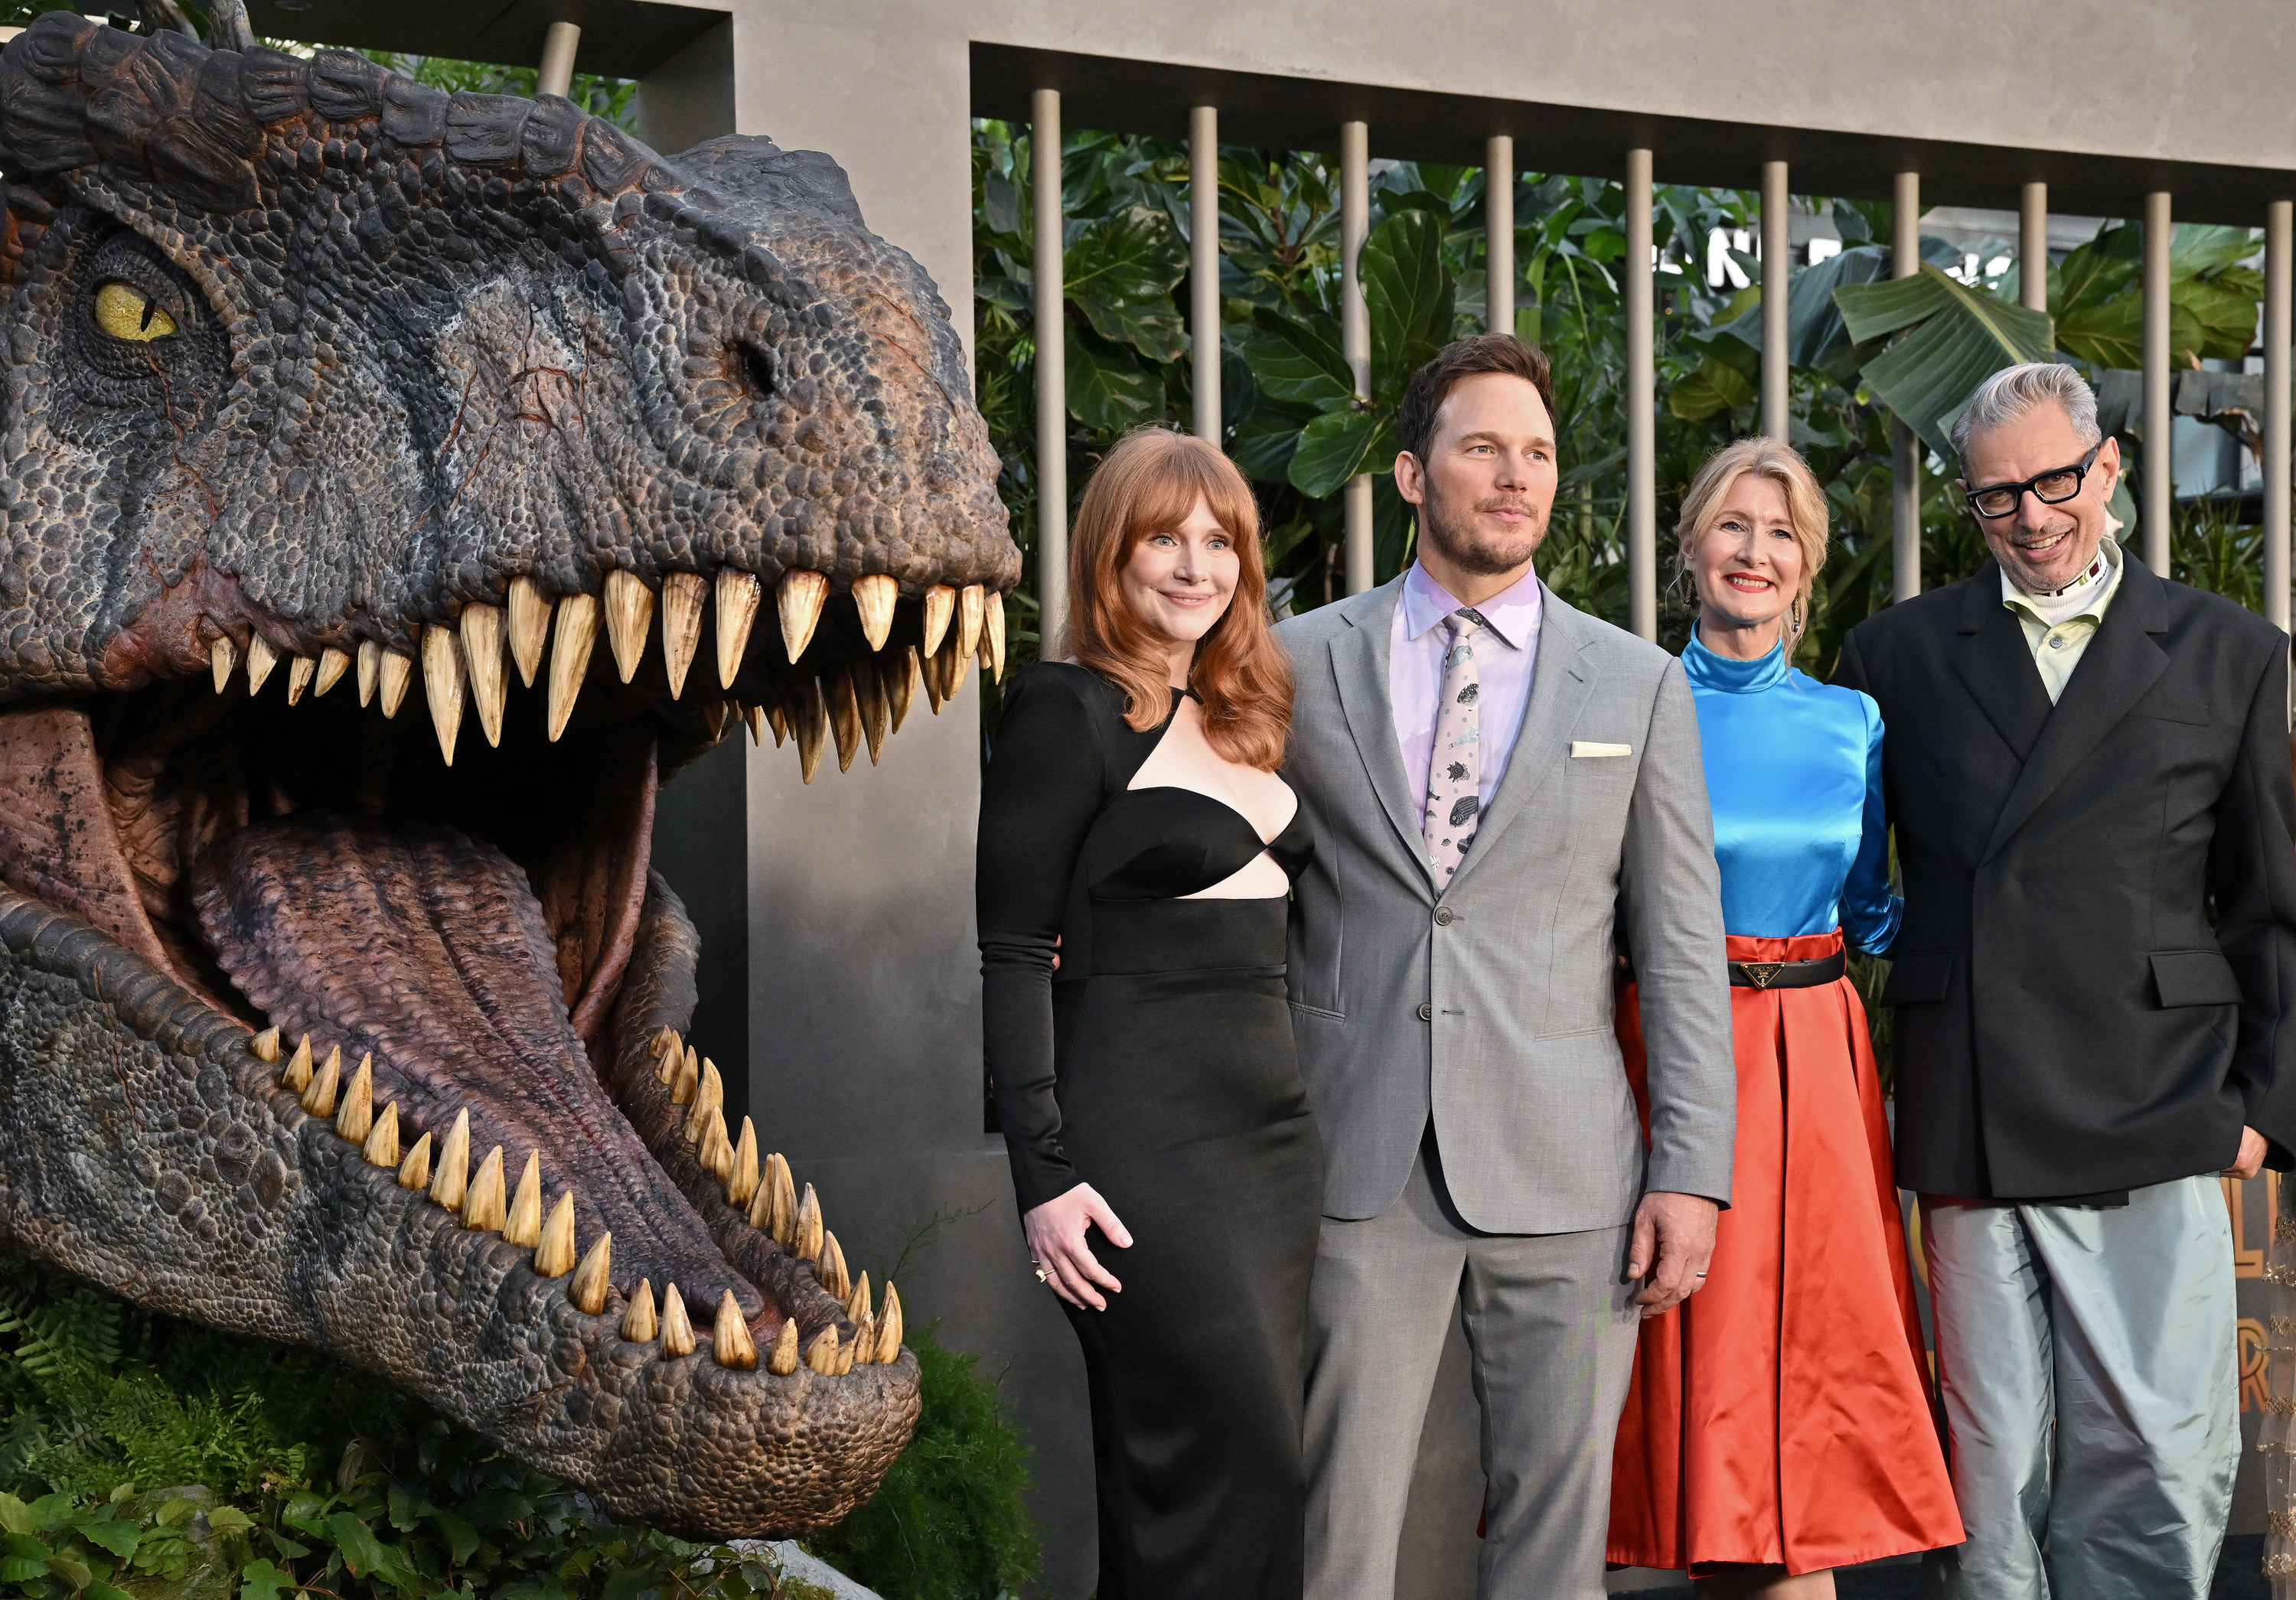 Chris Pratt, Bryce Dallas Howard, Laura Dern, and Jeff Goldblum on a red carpet standing in front of a giant dinosaur head